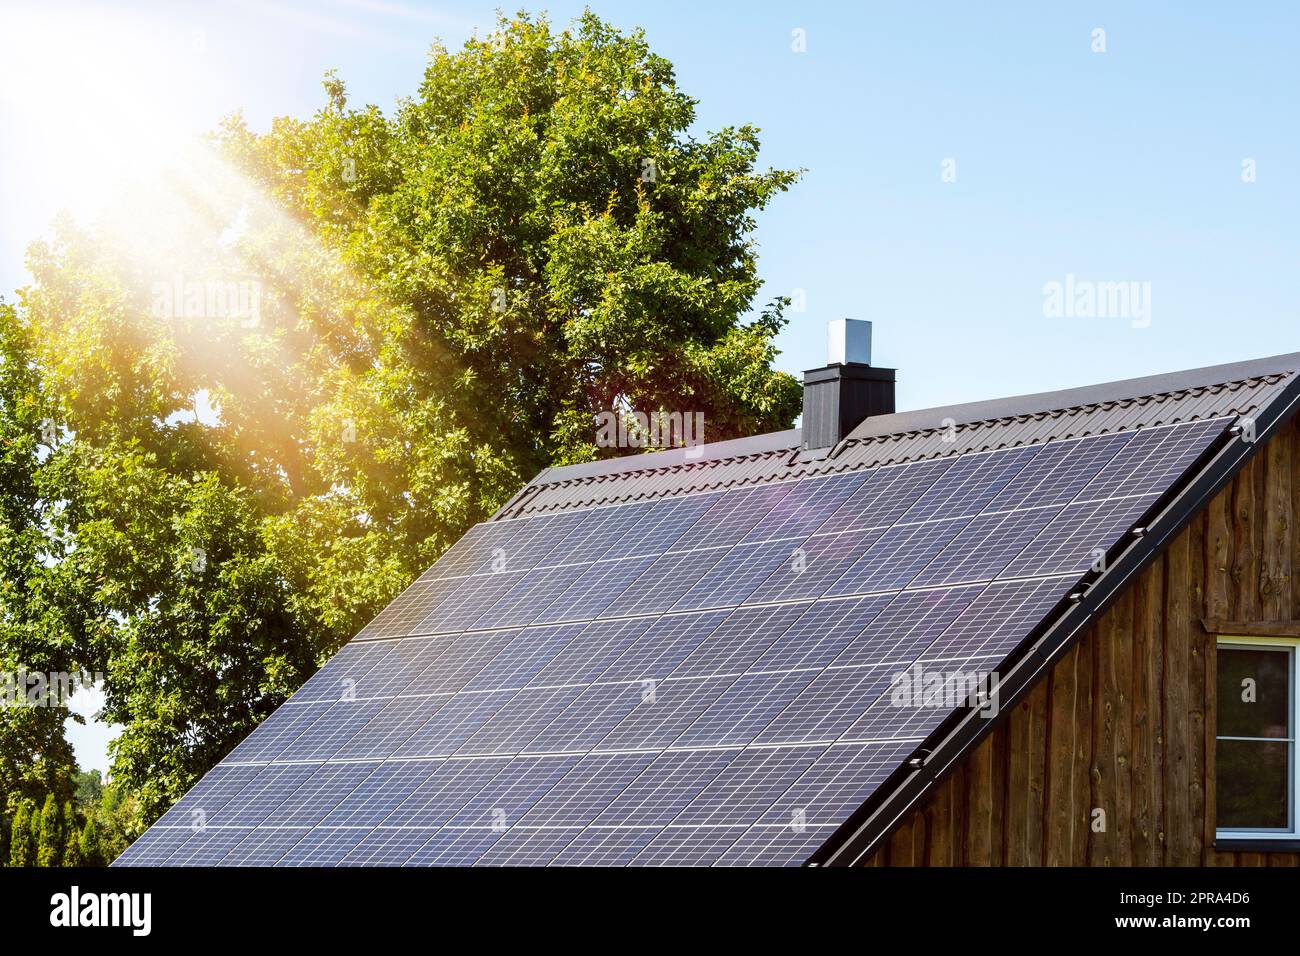 Photovoltaic on the roof of a smart home for alternative energy production Stock Photo